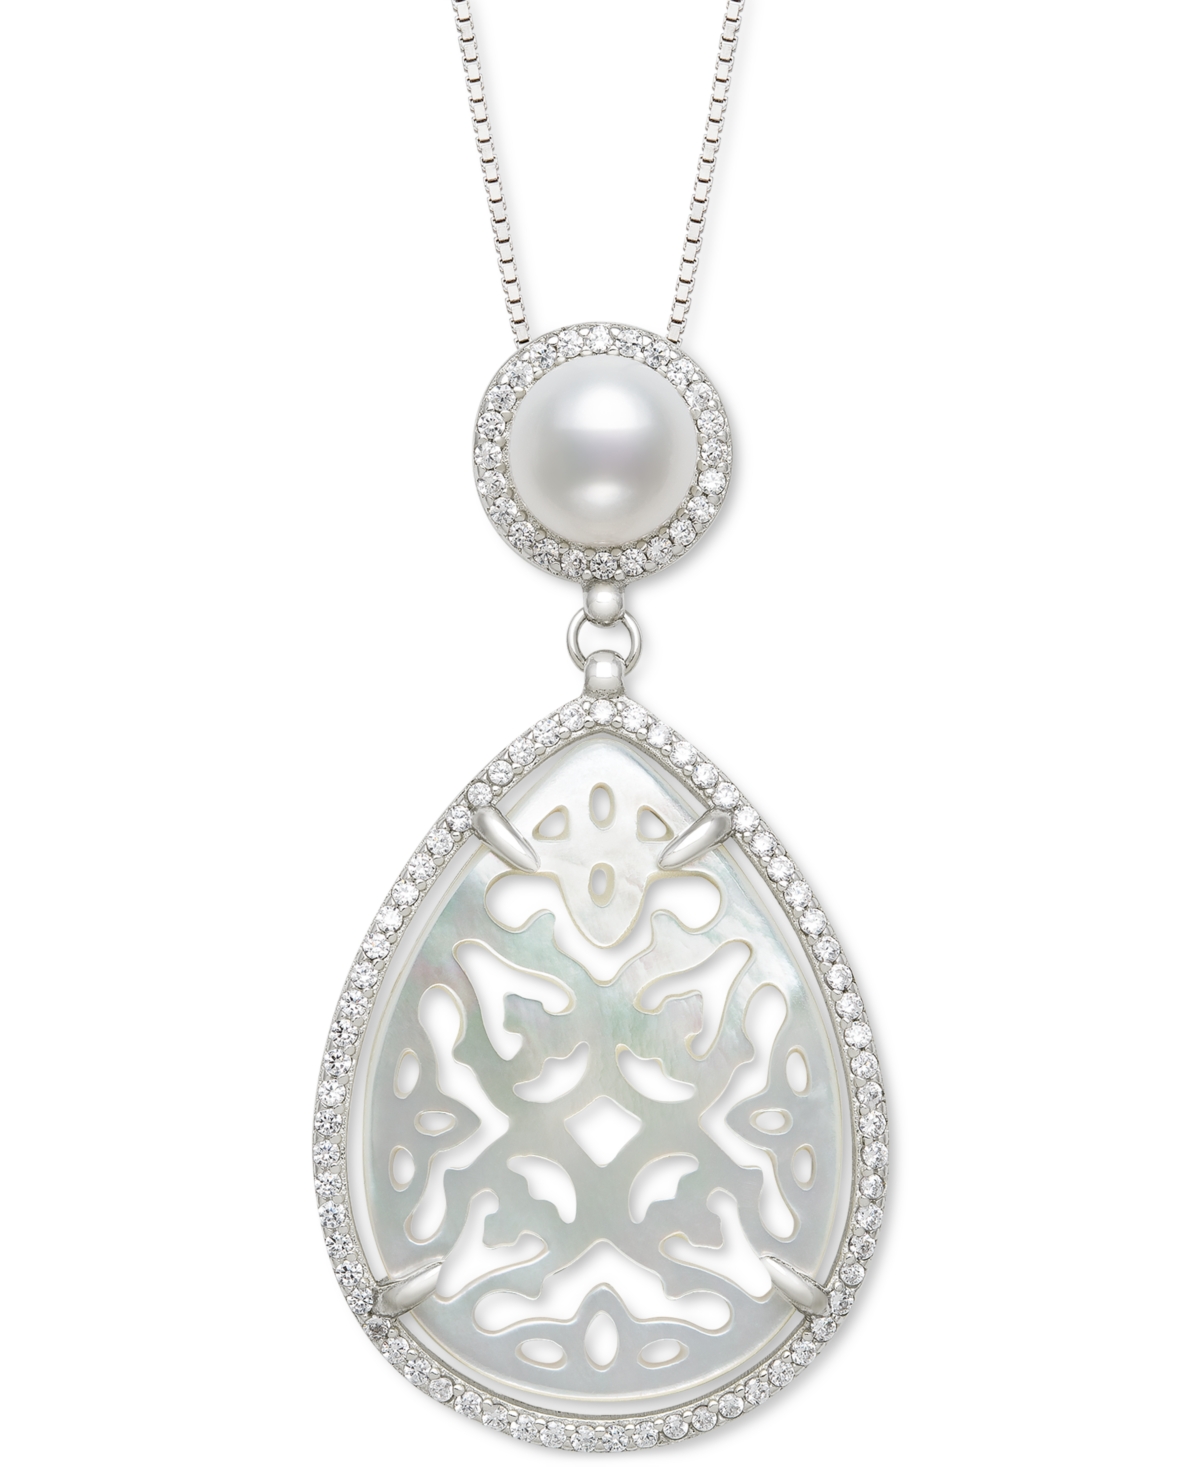 Belle de Mer Cultured Freshwater Pearl (6mm), Carved Mother-of-Pearl, & Cubic Zirconia 18" Pendant Necklace in Sterling Silver